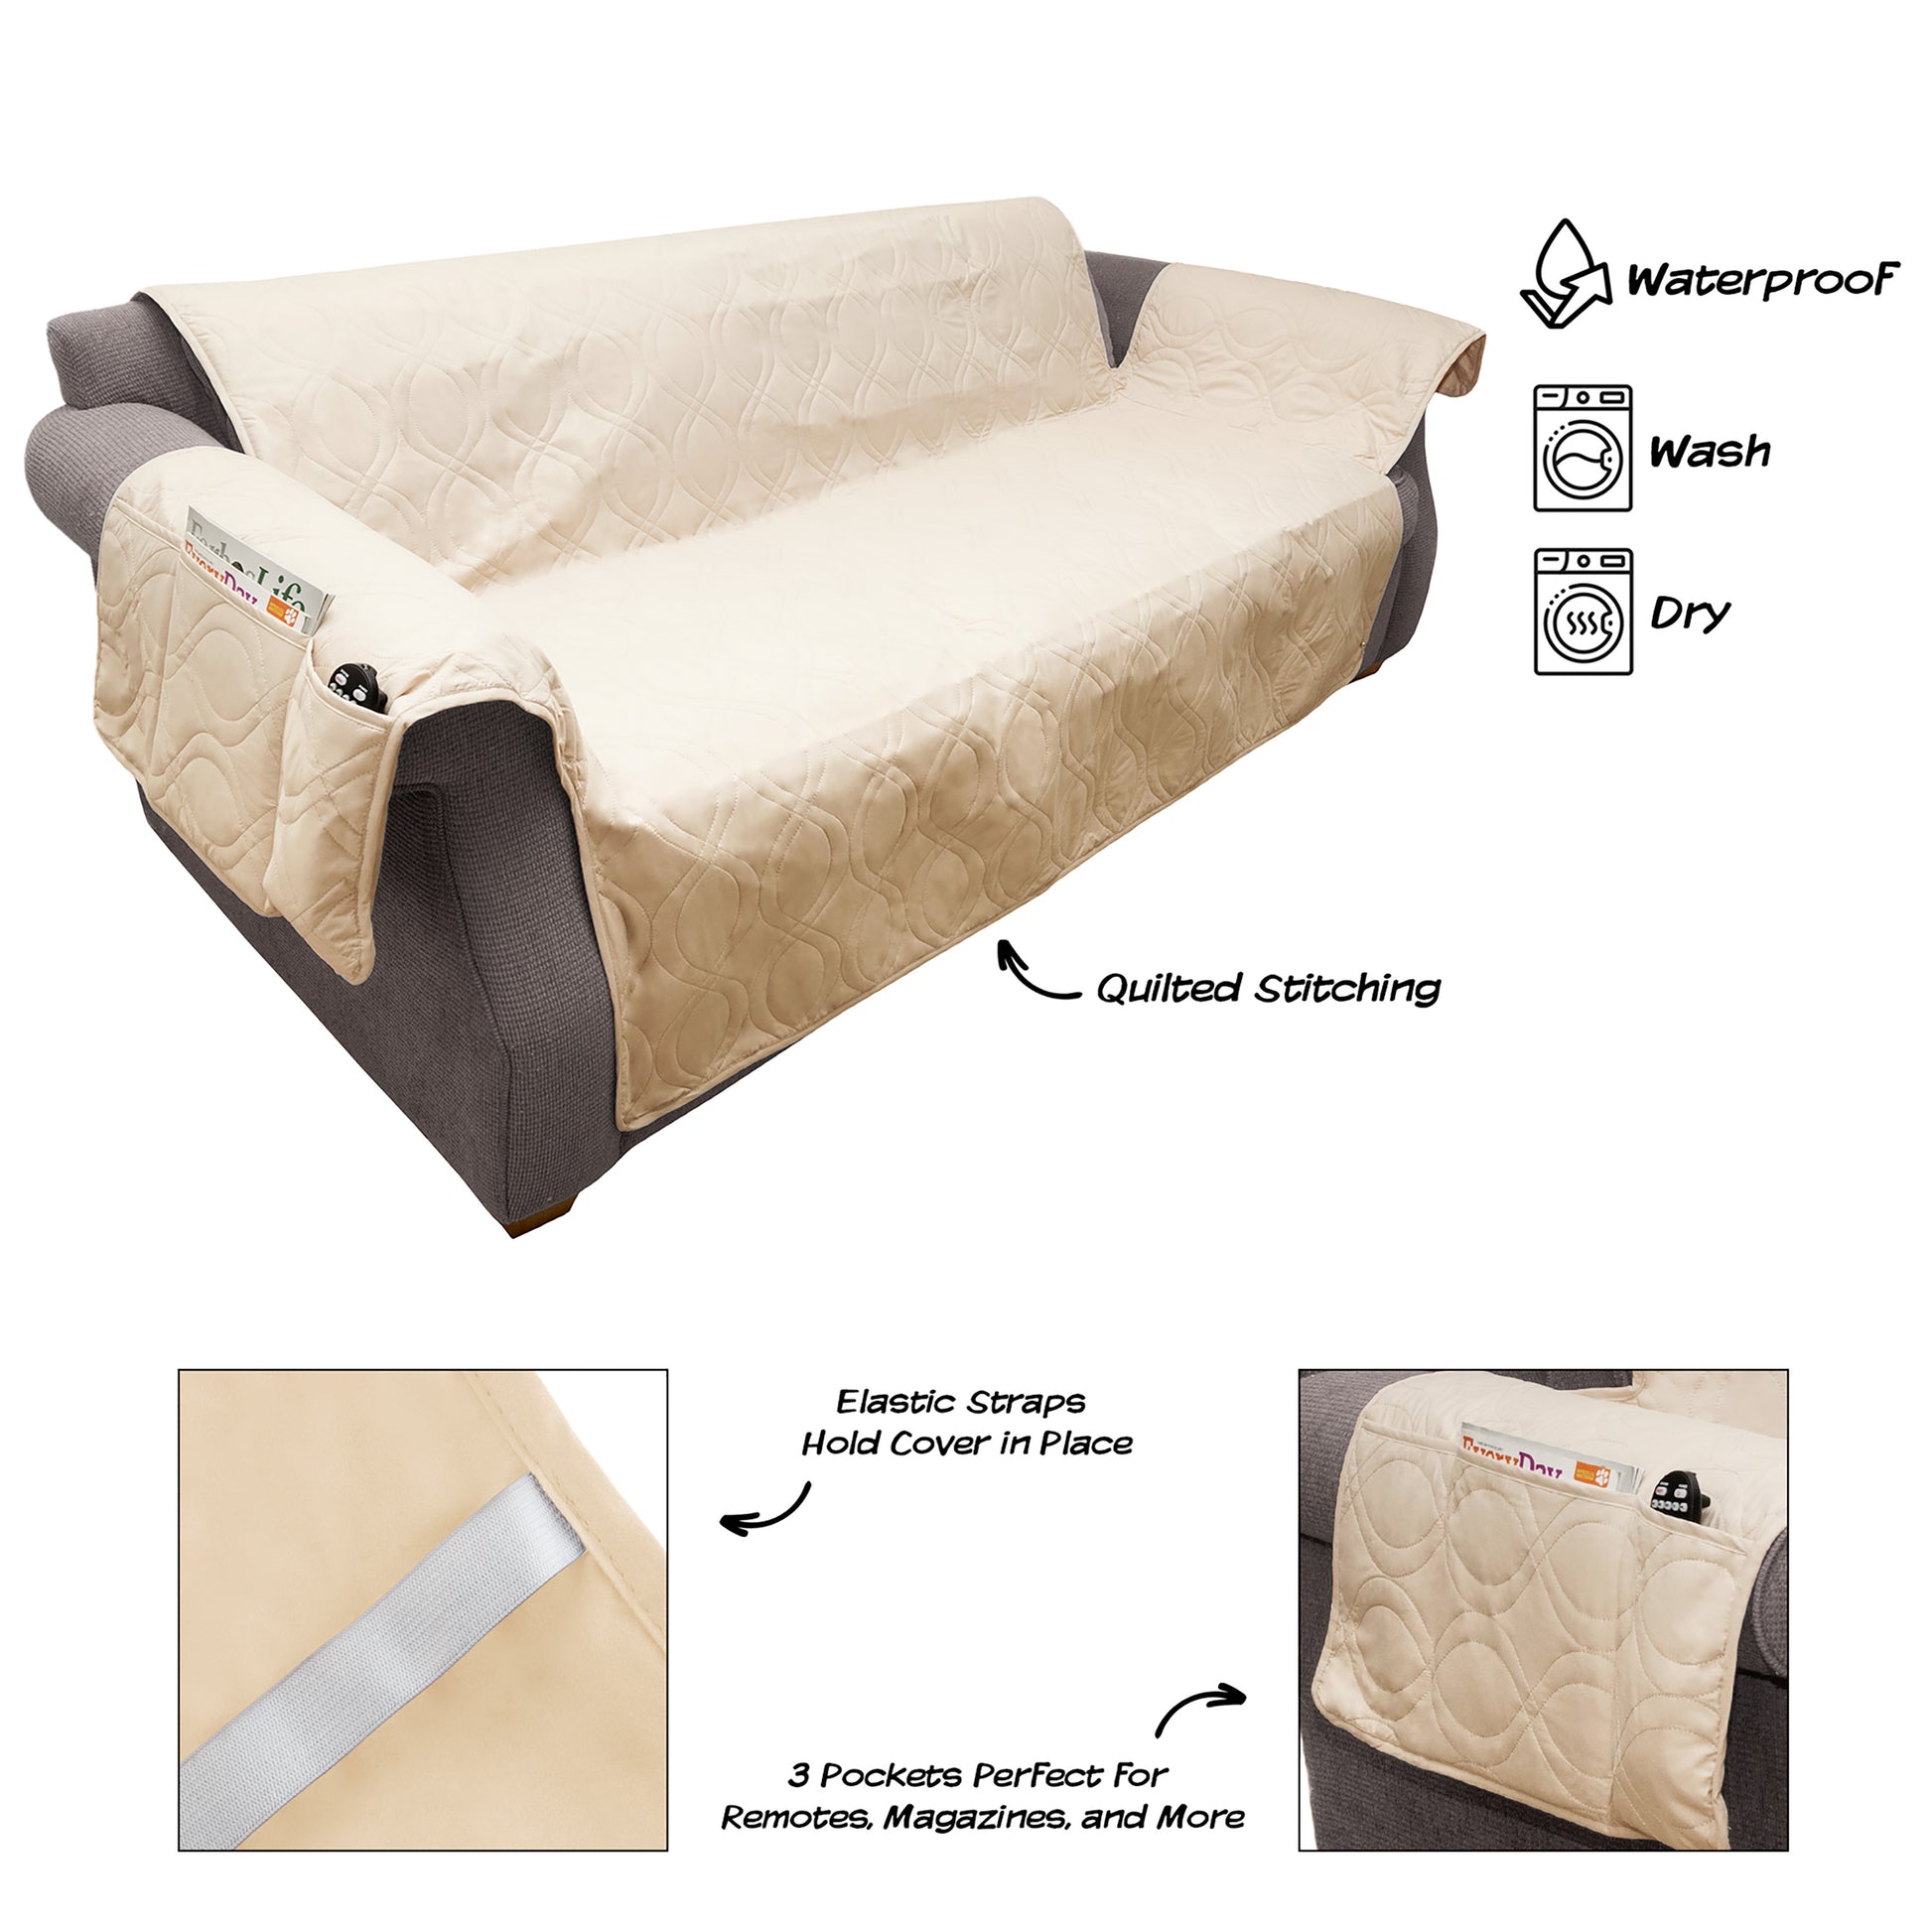 100% Waterproof Protector Cover for Couch/Sofa by Petmaker Tan